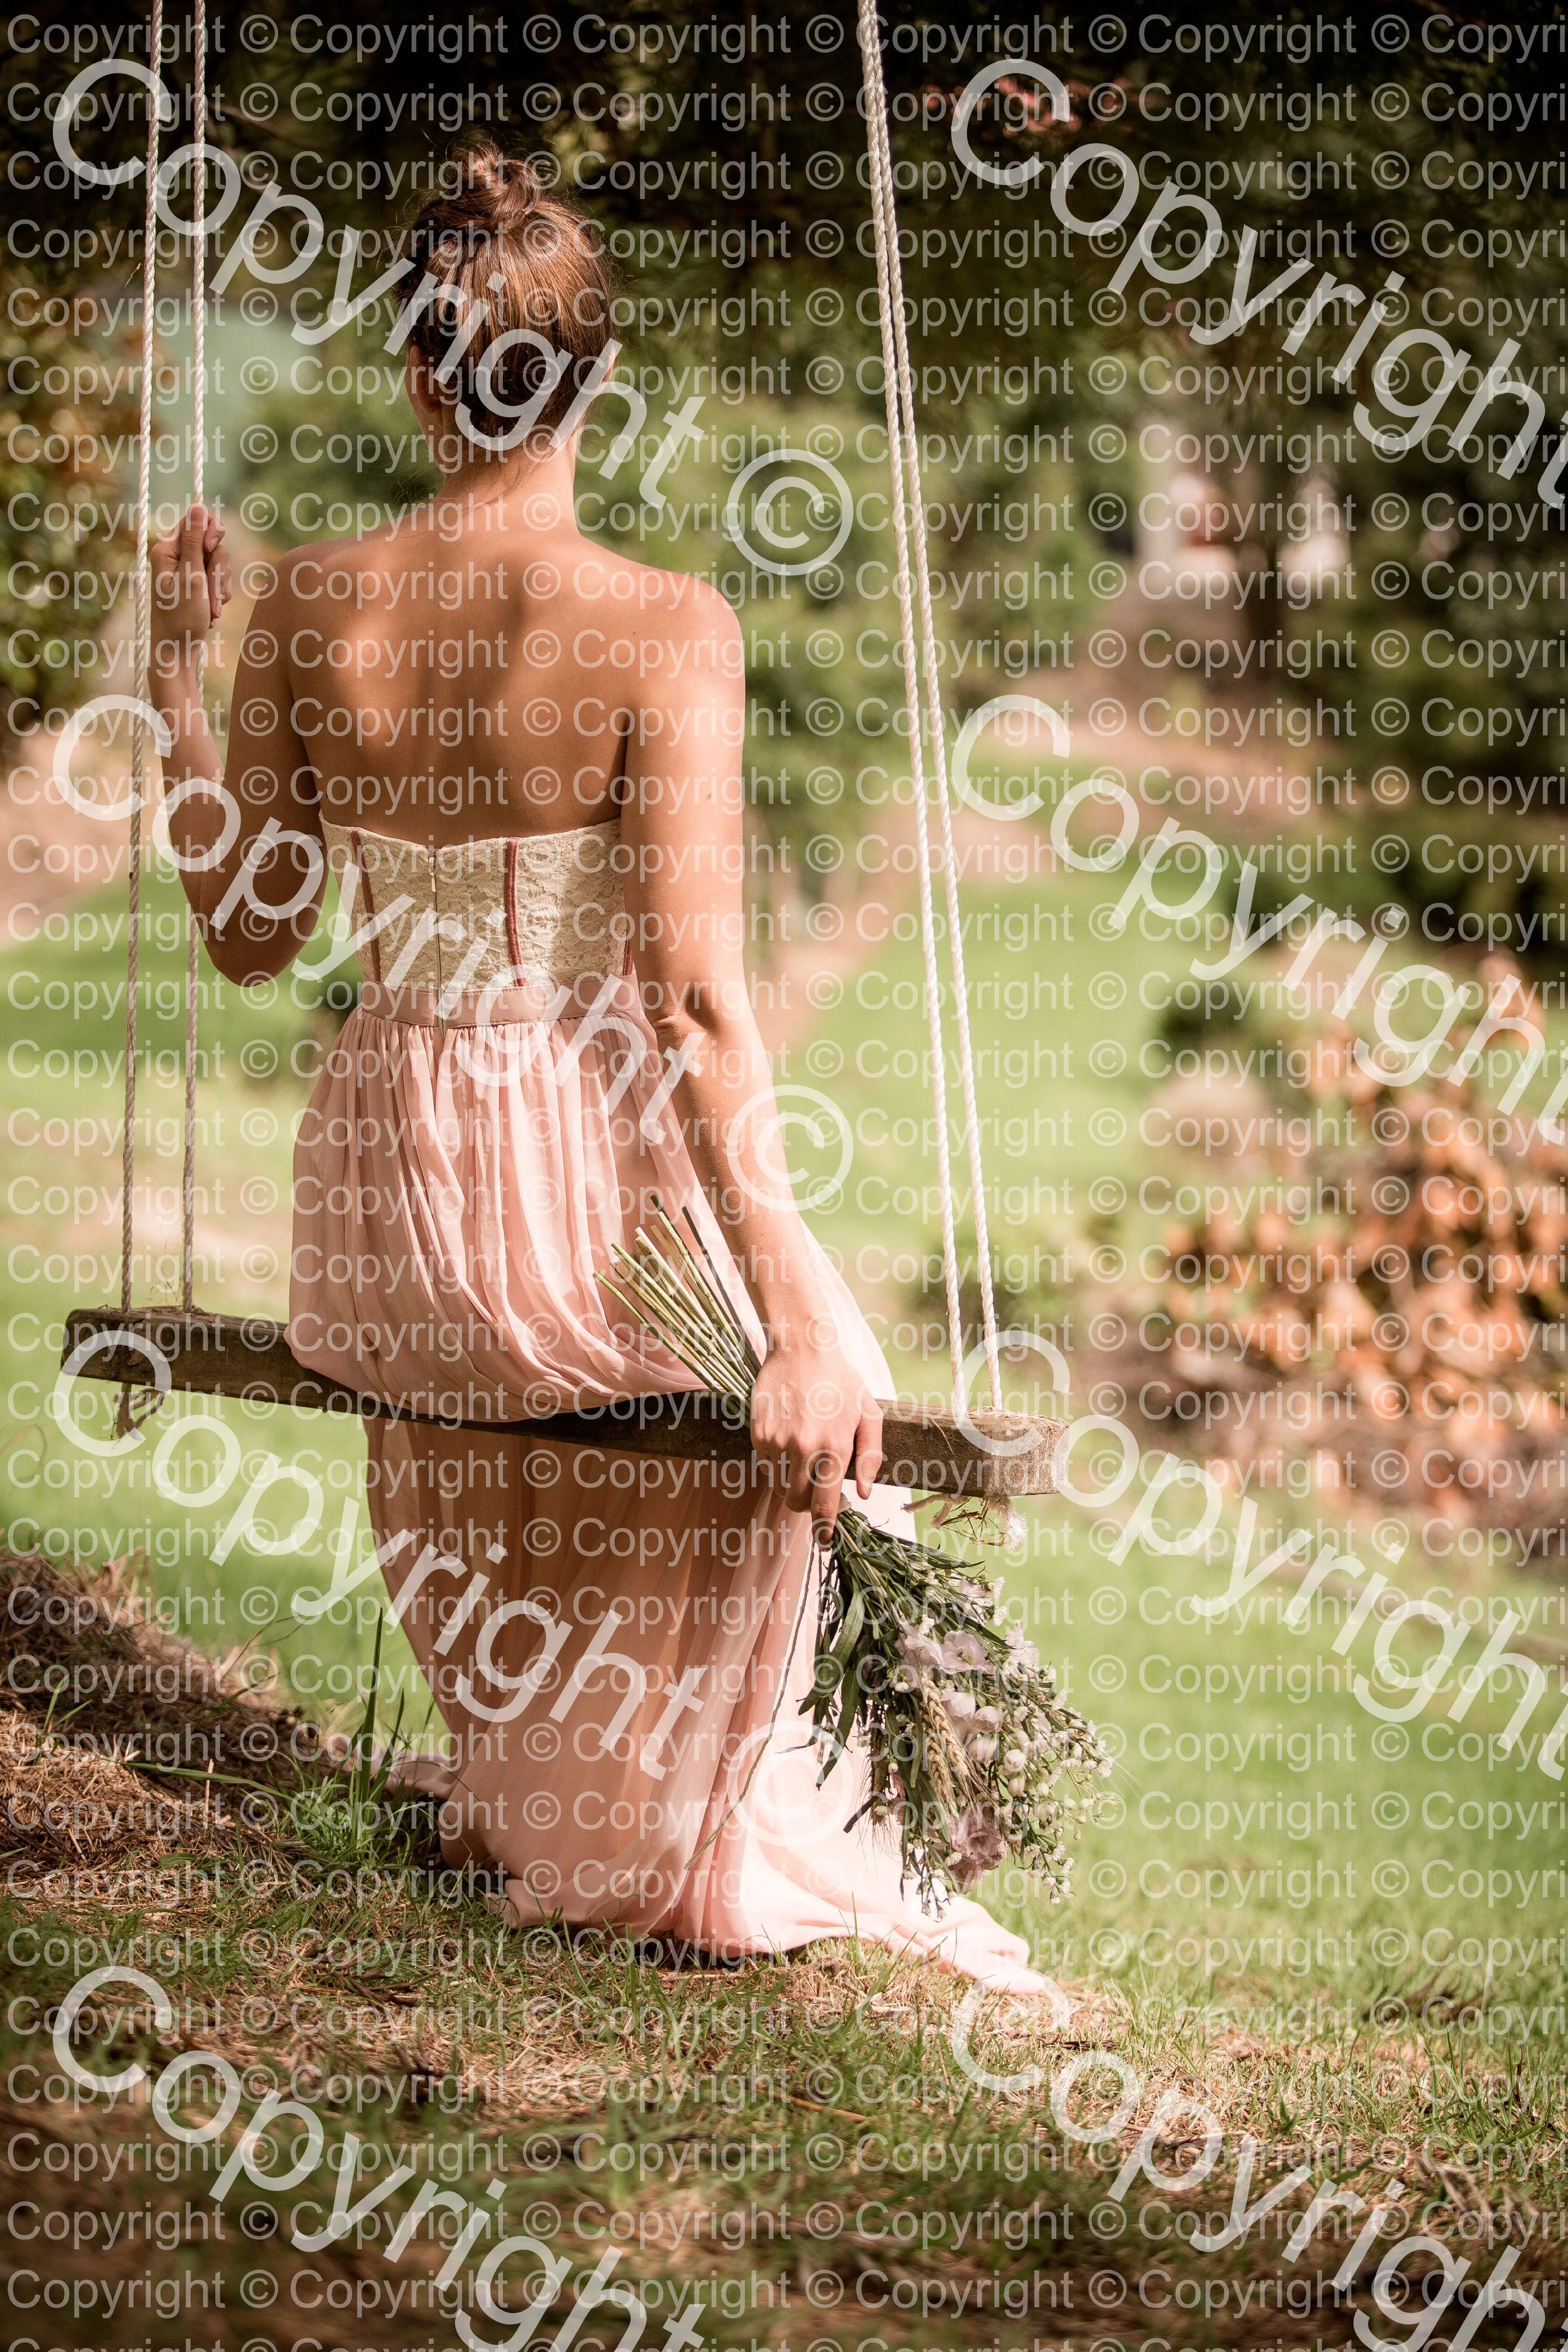 Watermark that is hard to remove.